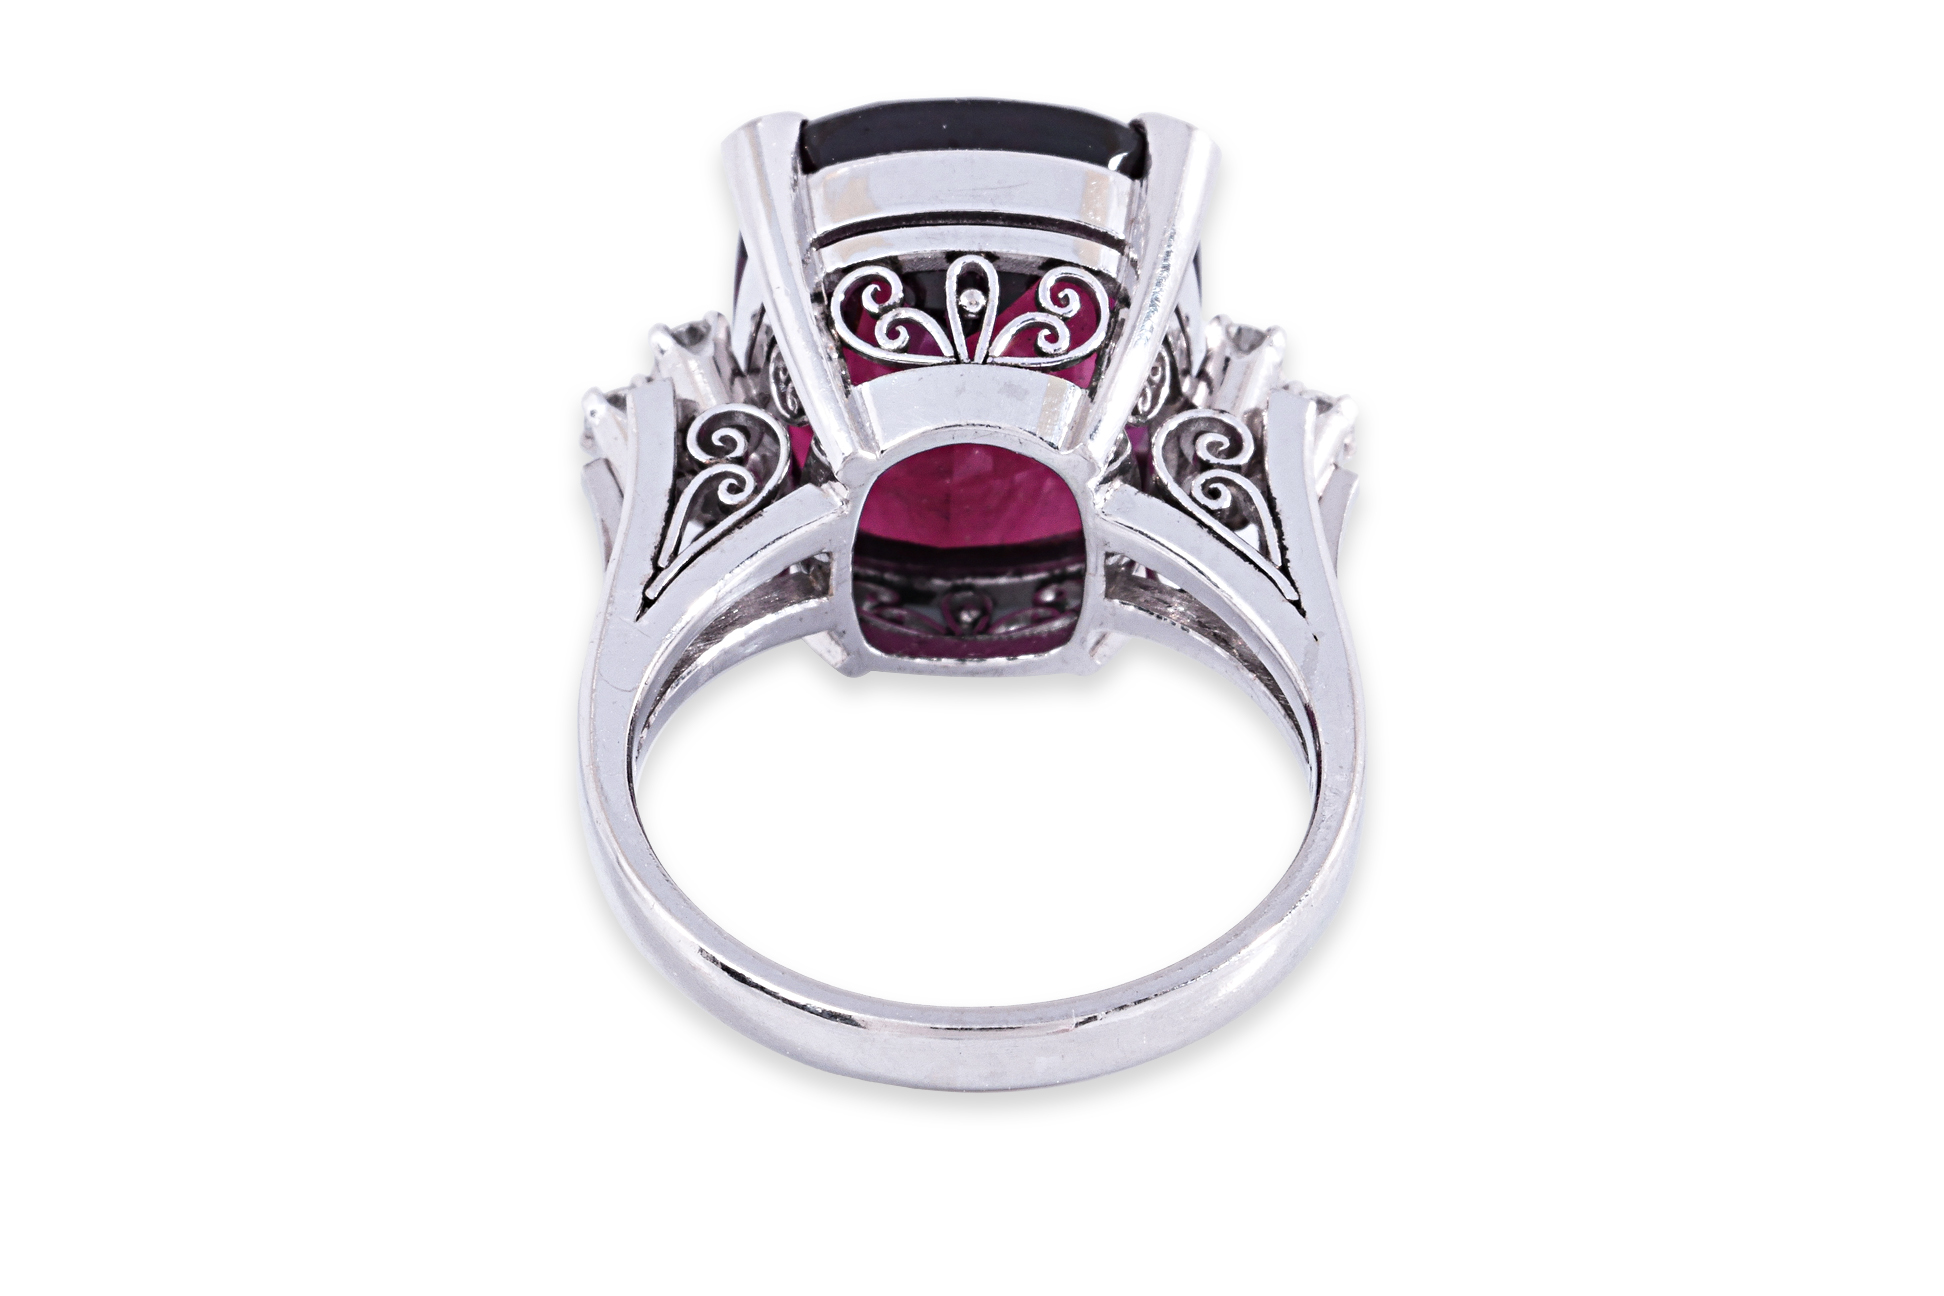 A LARGE RHODOLITE GARNET AND DIAMOND RING - Image 3 of 3